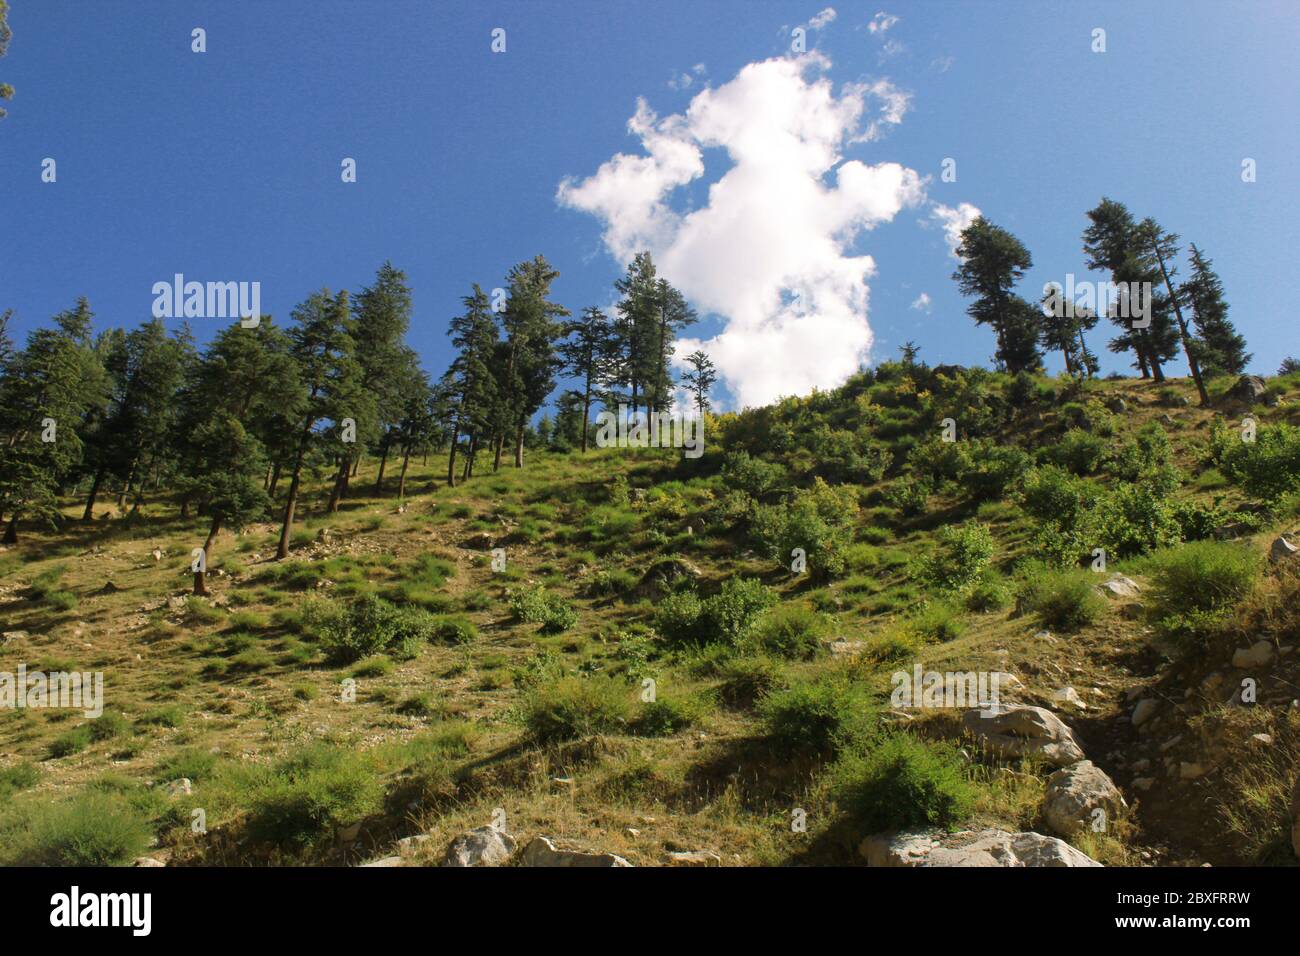 Beautiful mountains with blue skys,  green trees in swat valley kpk Pakistan Stock Photo